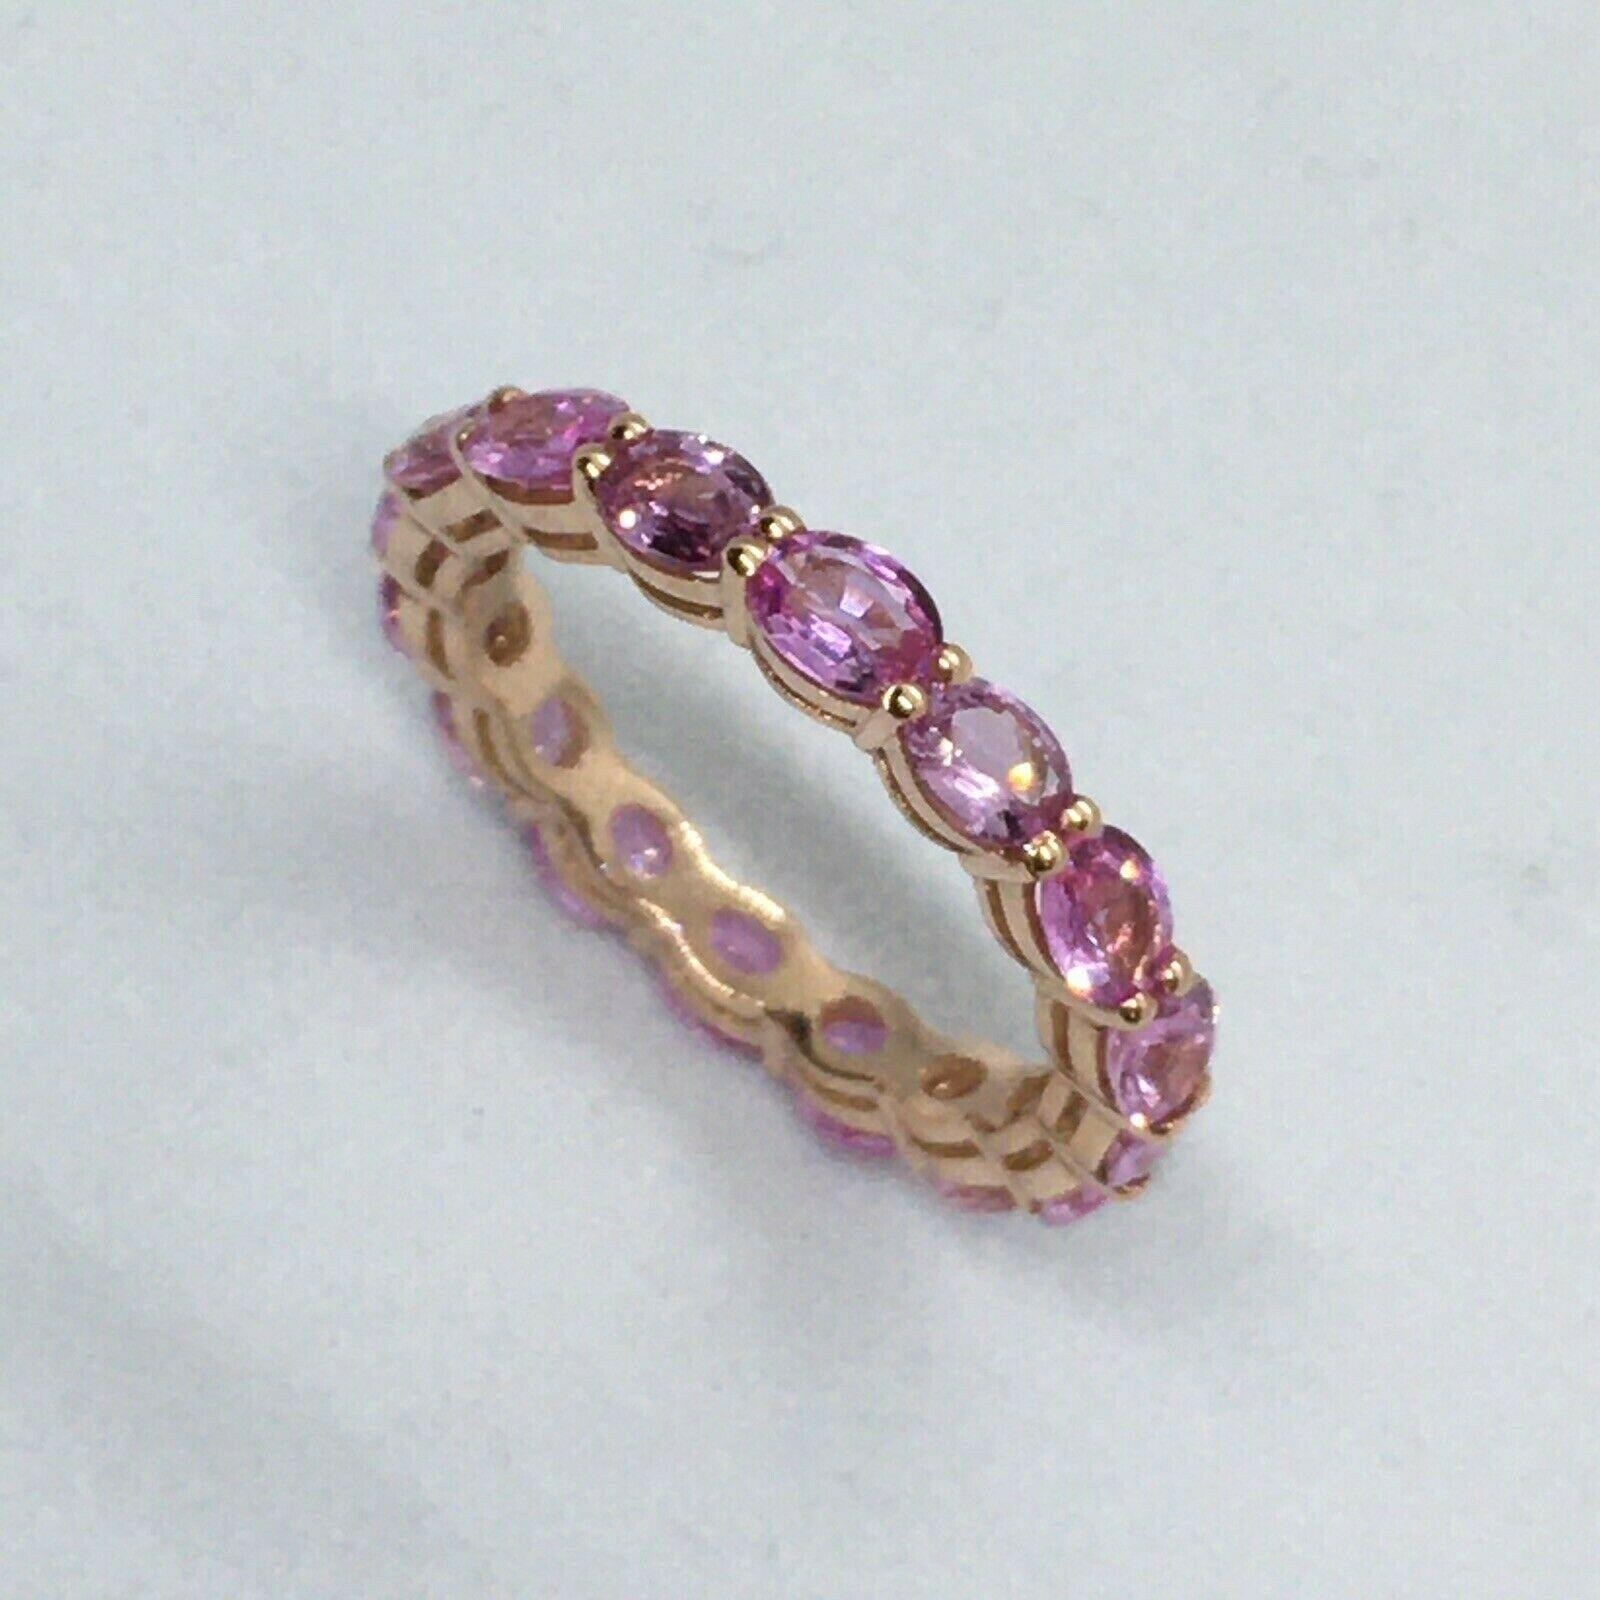 Nobel Gems presents 4.00 Ct Natural Oval Pink Sapphire Eternity Band 14k Rose Gold

Size 6 3/4
Weighing 2.3 gram
3 mm Double Wire setting
14K Rose Gold
4.00 Carat
4 mm by 3 mm Natural oval cut Pink Sapphire
3 mm band thickness
American made in Santa